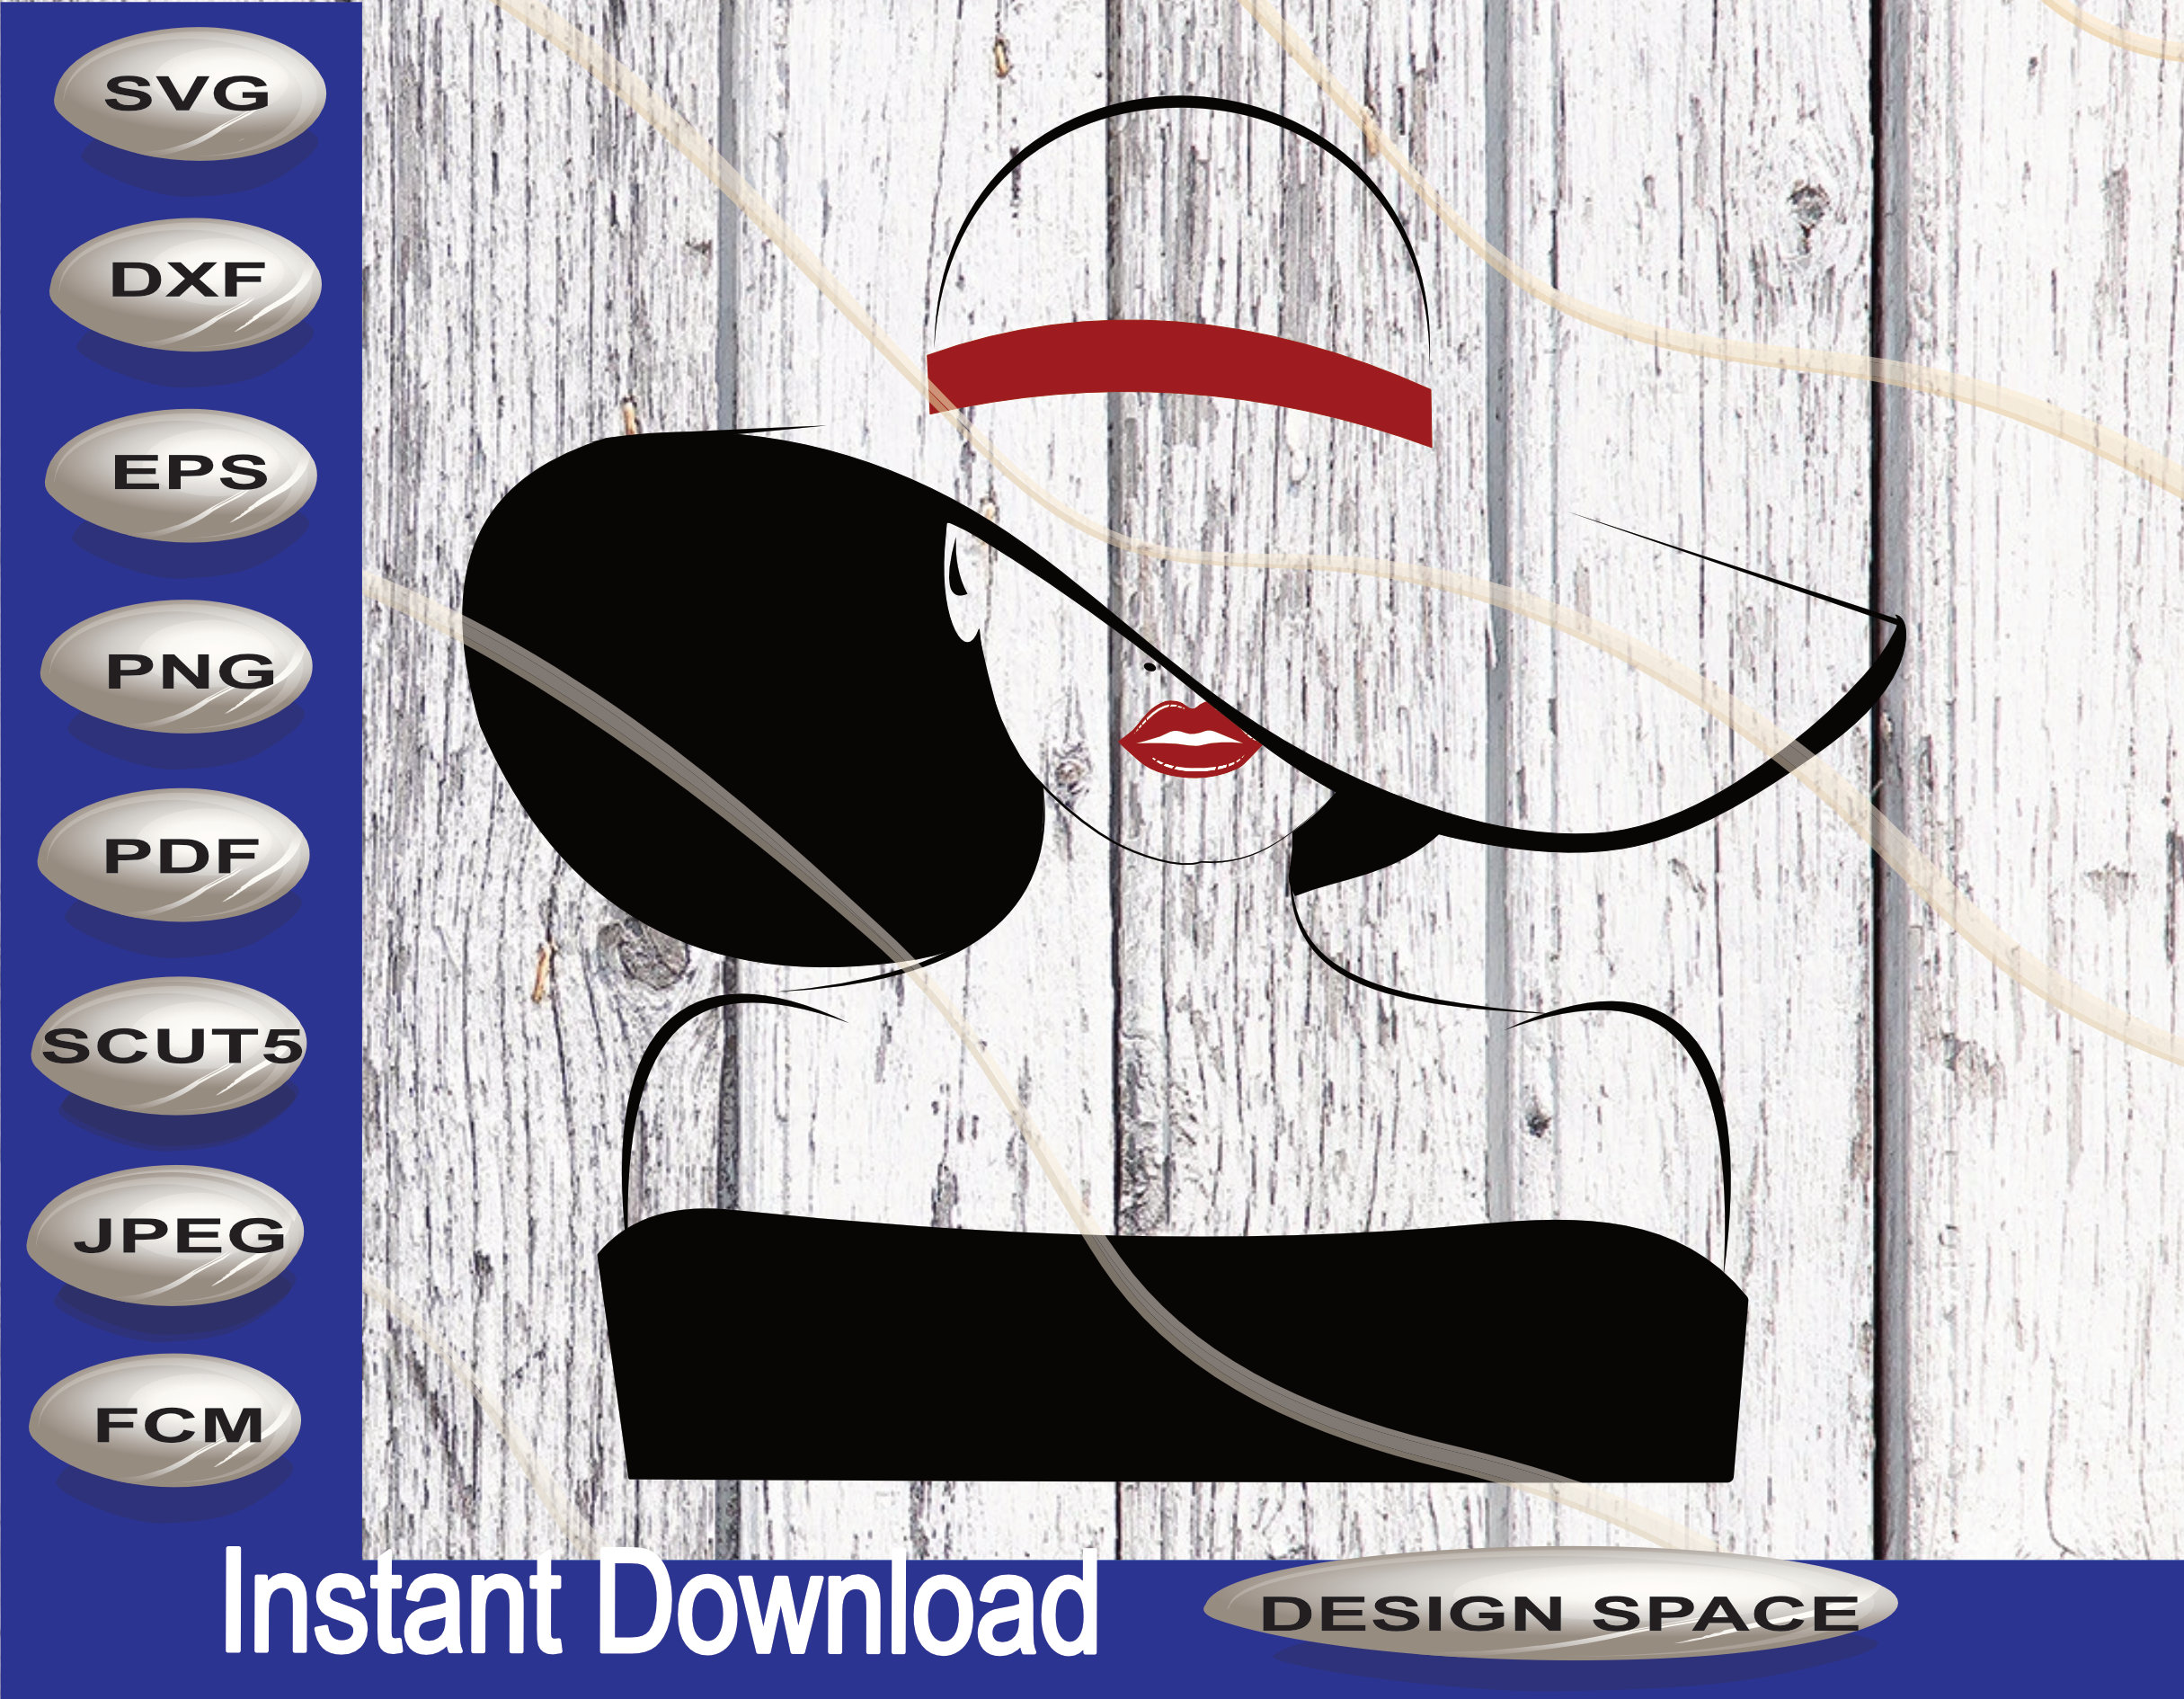 Dior 3D Style Svg - Download SVG Files for Cricut, Silhouette and